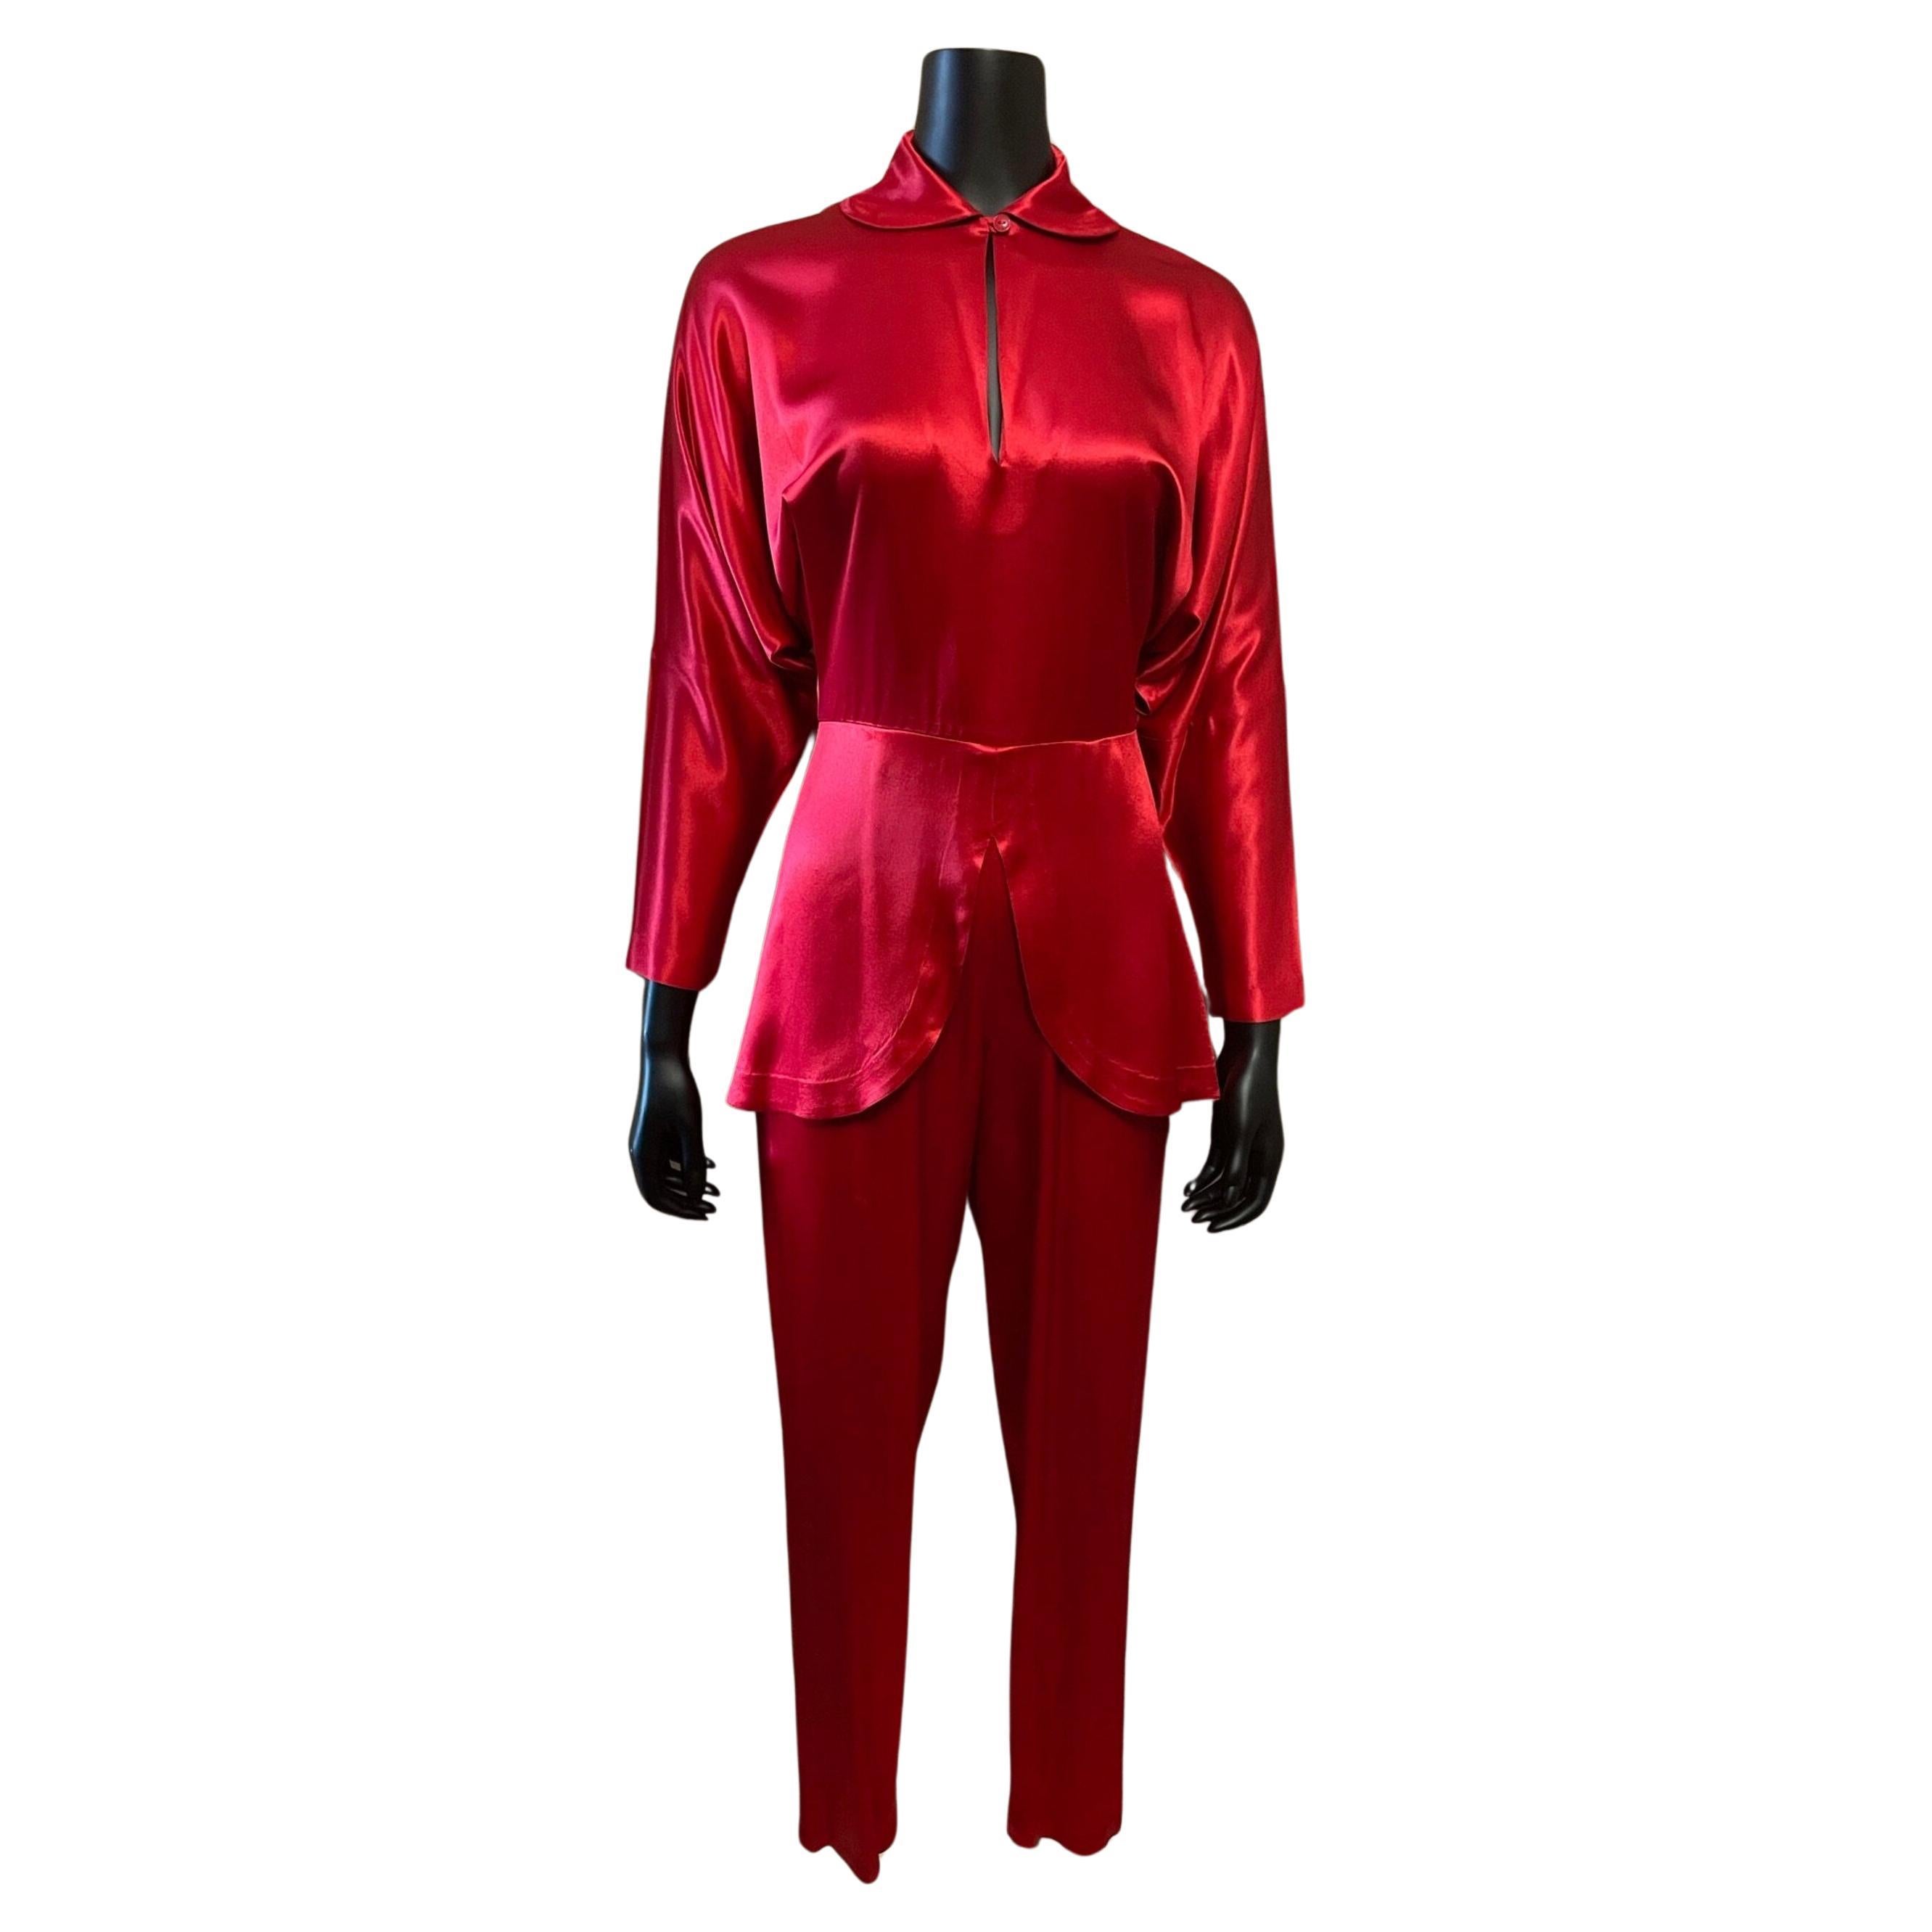 Norma Kamali Lipstick Red Jumpsuit, Circa 1980s For Sale